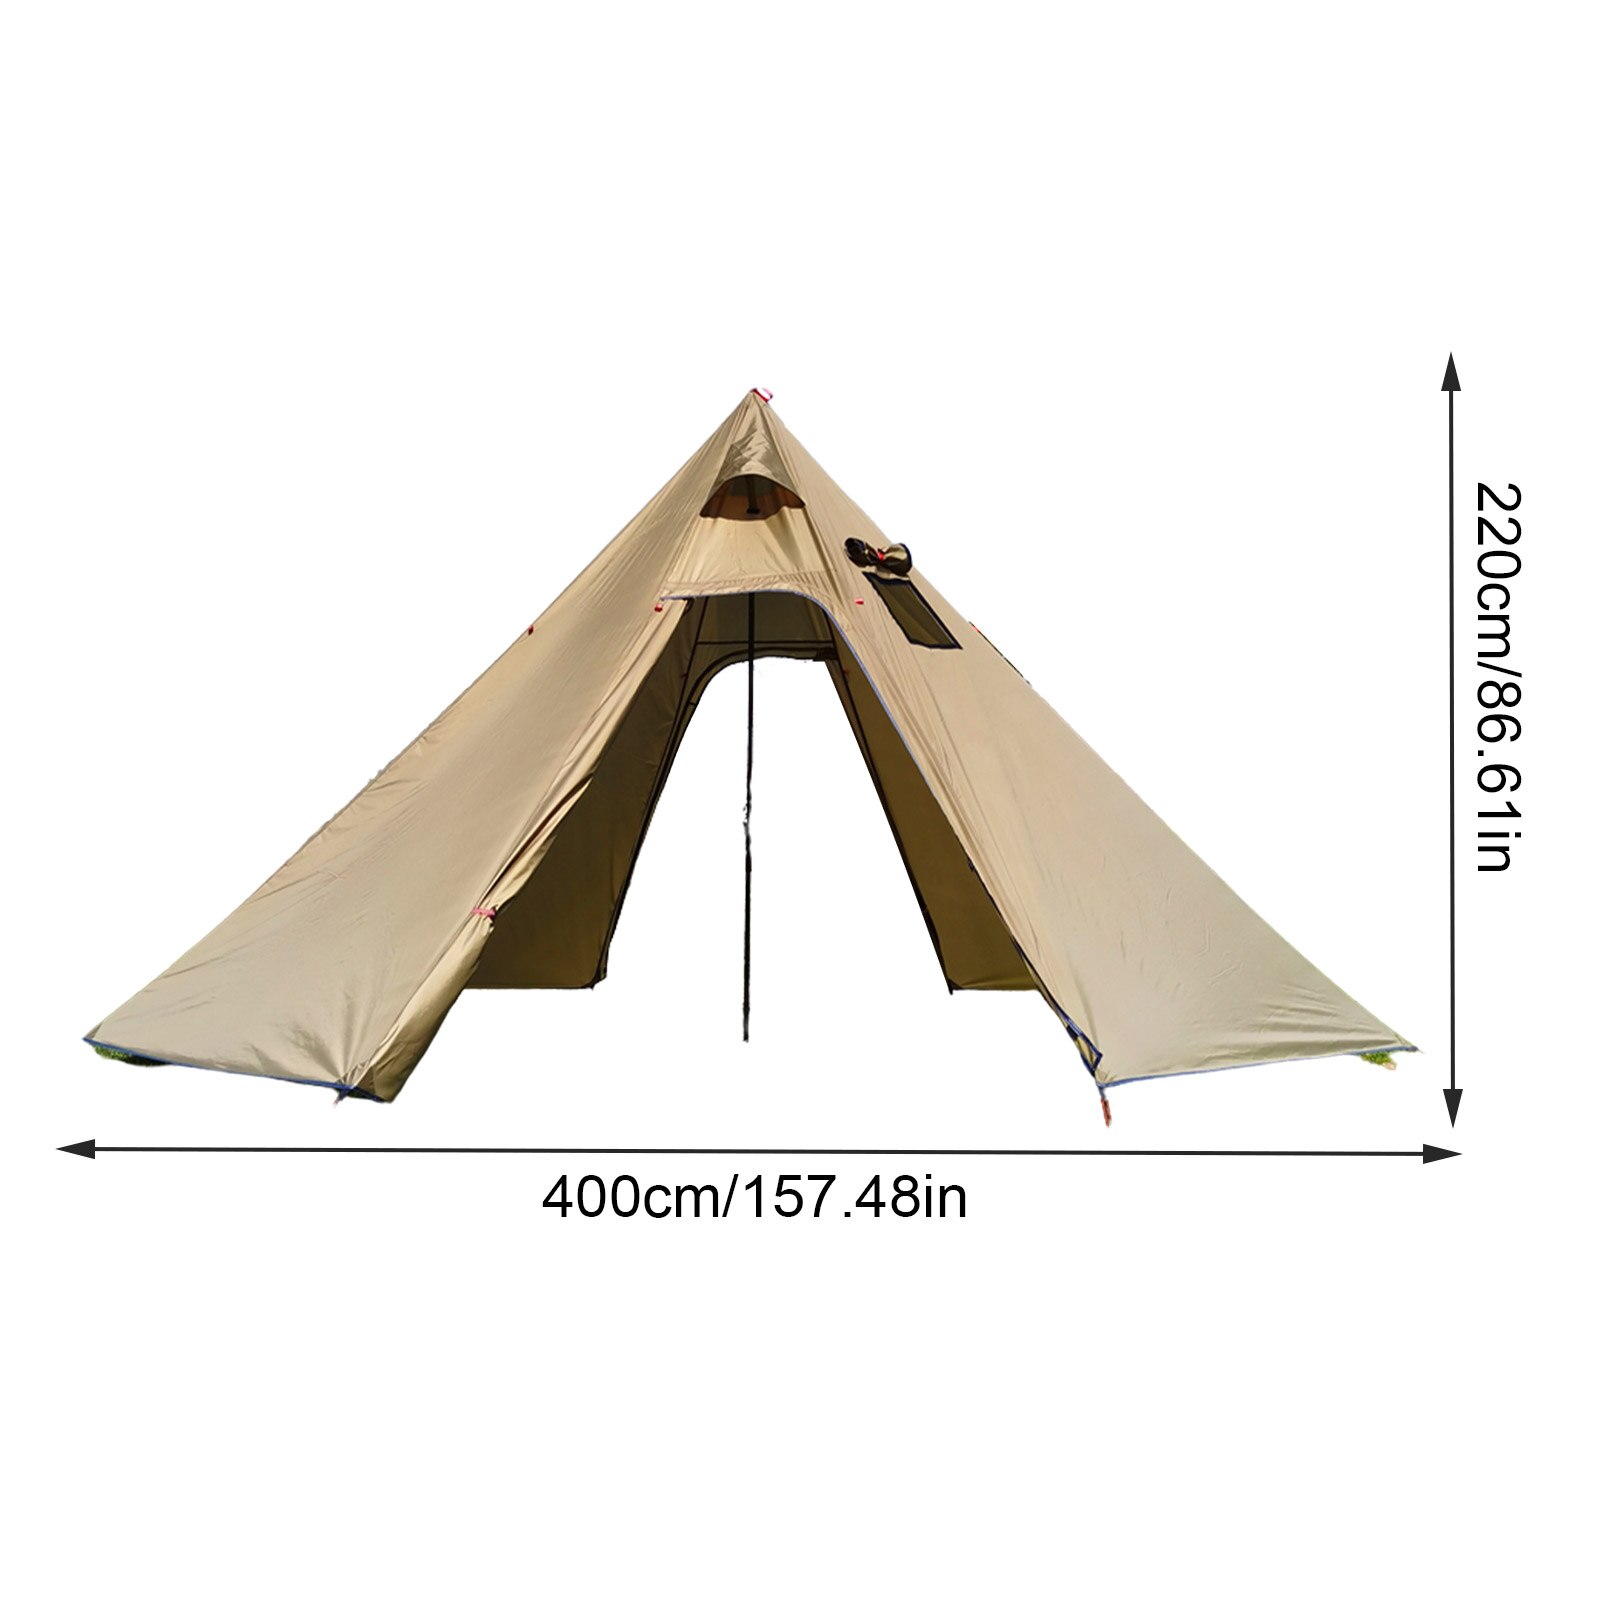 Cheap Goat Tents Camping Tent 3 Person Family Tent Waterproof Windproof Easy Setup Tent Easy Setup 3 Person Tent Sun Shade Square Chimney Window   